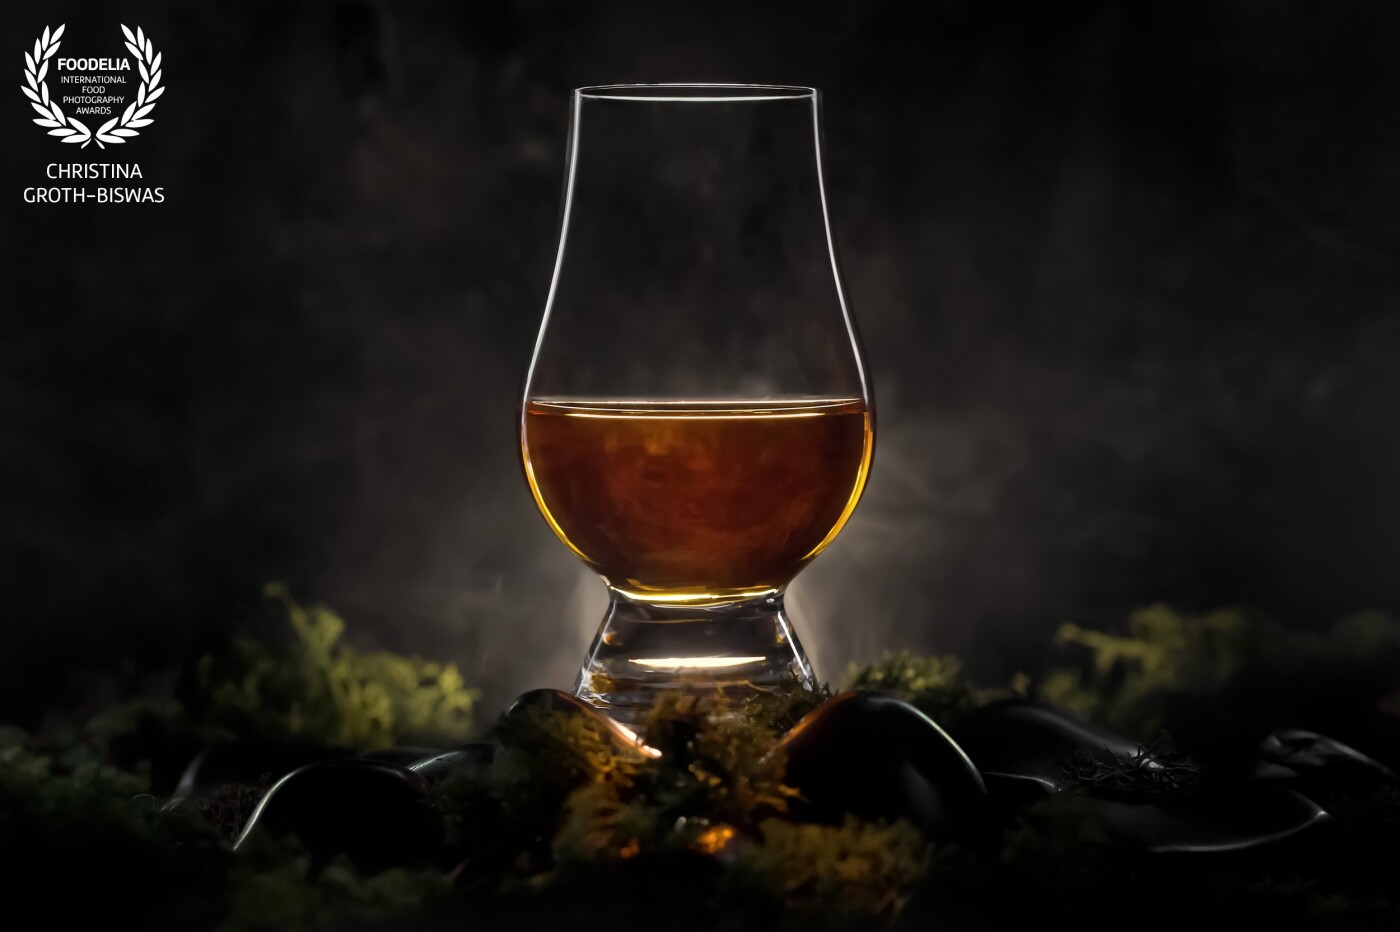 This is a traditional Glencairn whiskey glass. I wanted to portray it in a way that gives the viewer an impression of the Scottish landscape with moss, rocks and some mystic light.